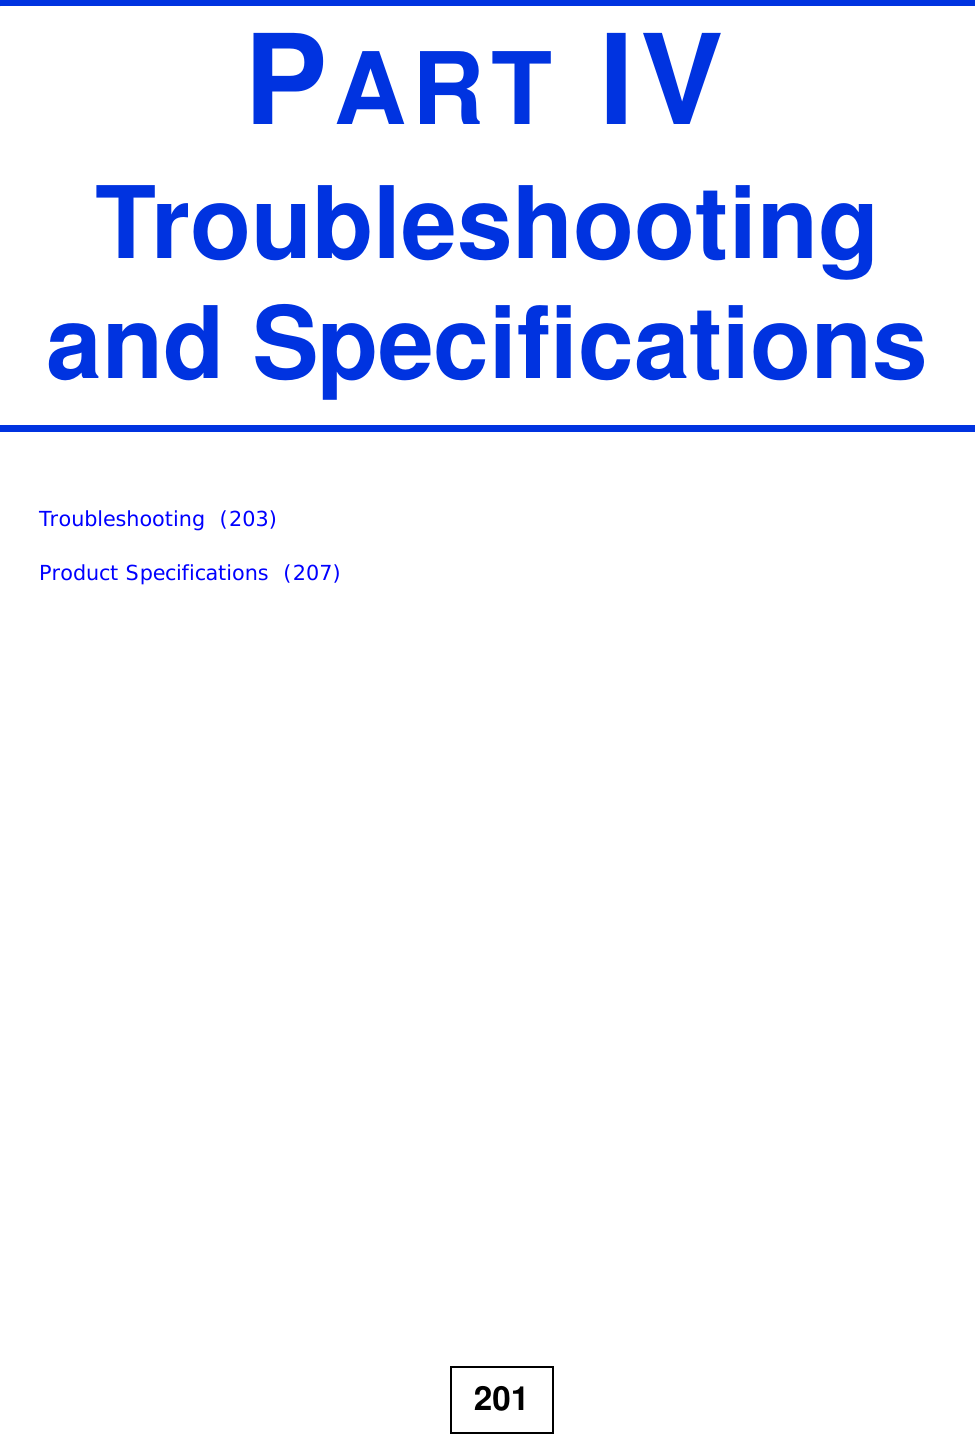 201PART IVTroubleshooting and SpecificationsTroubleshooting  (203)Product Specifications  (207)